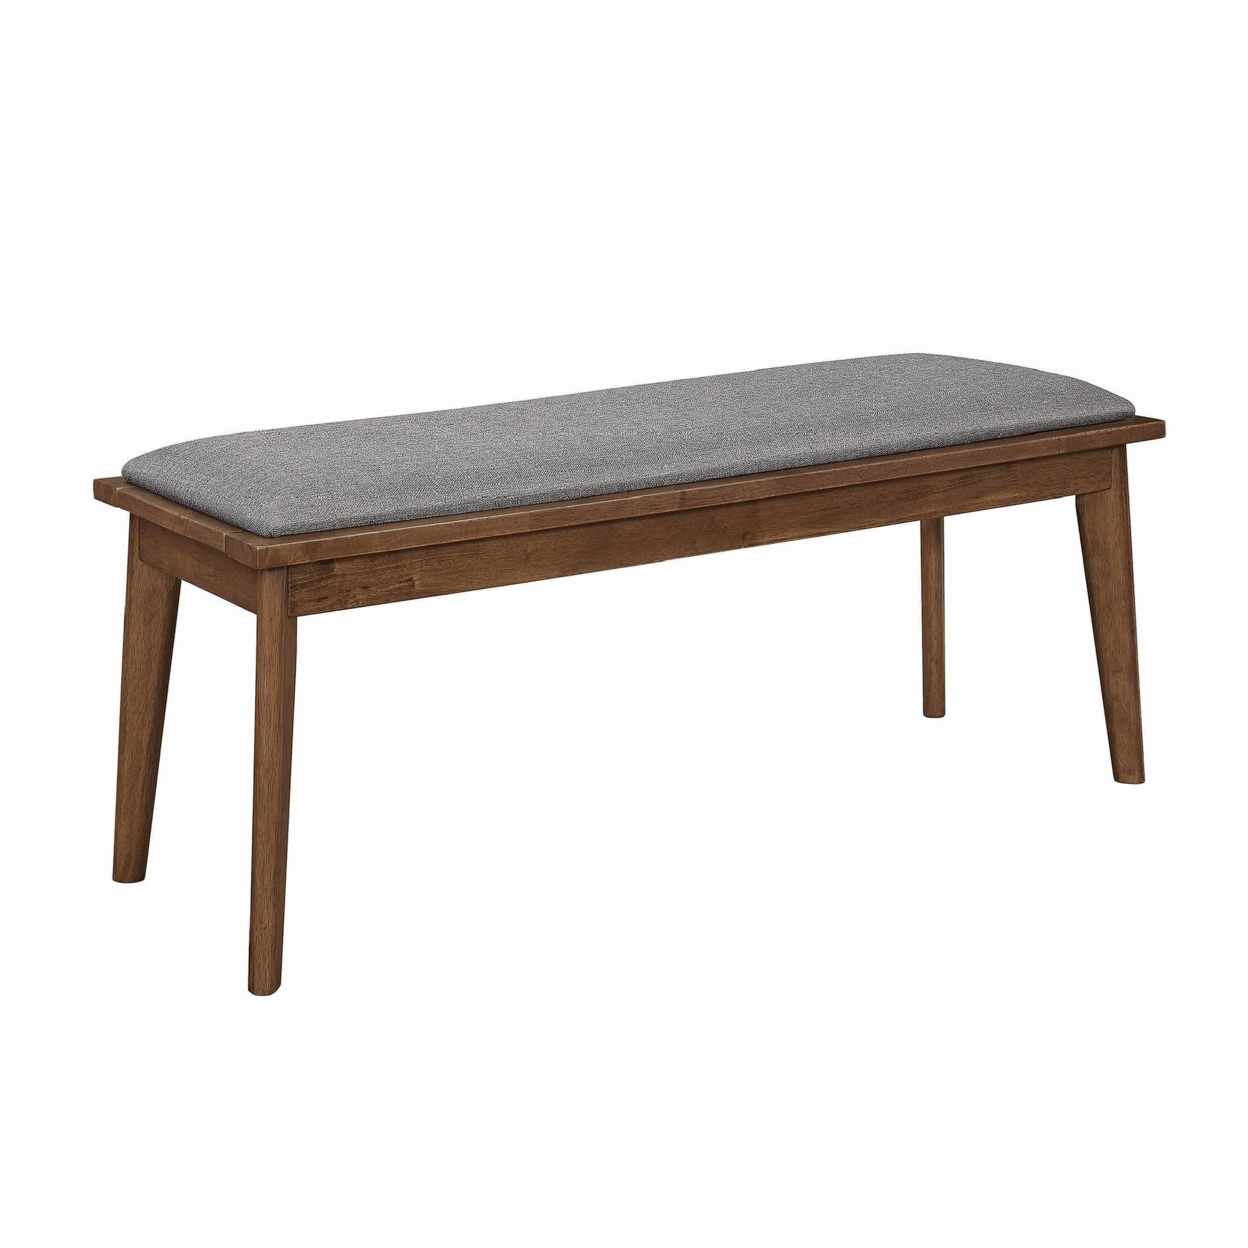 Fabric Upholstered Wooden Bench With Chamfered Legs, Gray And Brown- Saltoro Sherpi